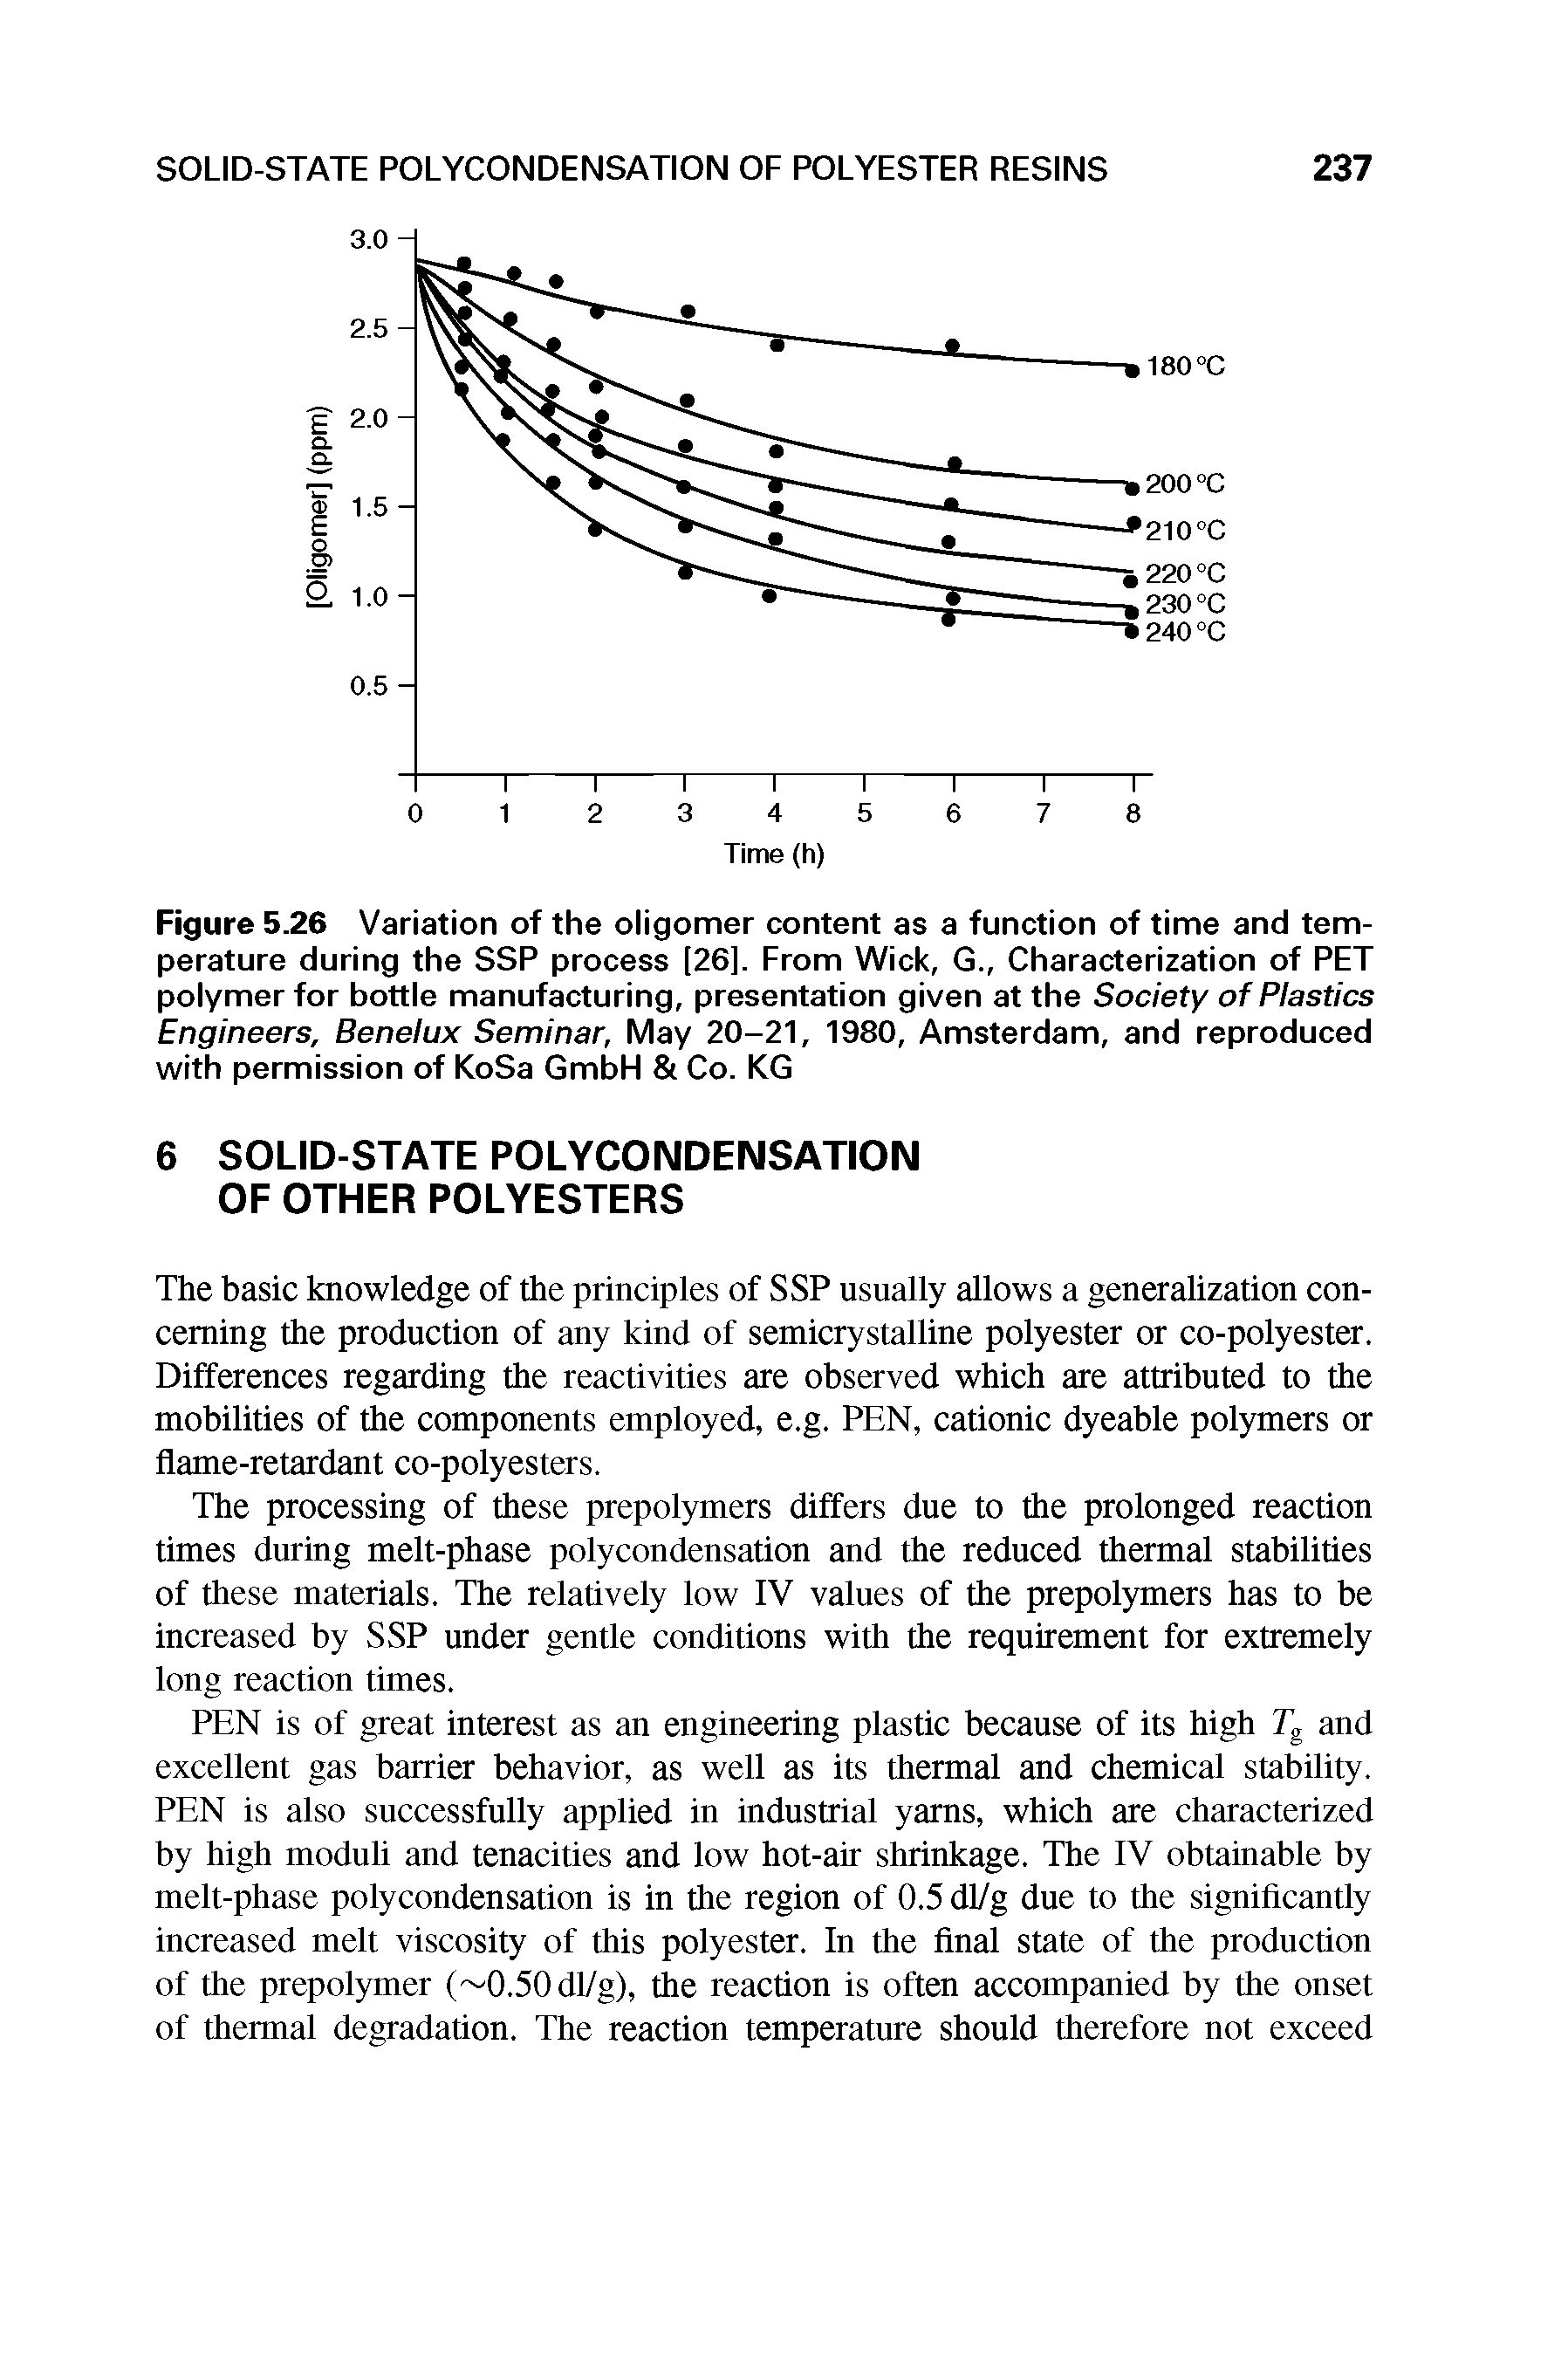 Figure 5.26 Variation of the oligomer content as a function of time and temperature during the SSP process [26]. From Wick, G., Characterization of PET polymer for bottle manufacturing, presentation given at the Society of Plastics Engineers, Benelux Seminar, May 20-21, 1980, Amsterdam, and reproduced with permission of KoSa GmbH Co. KG...